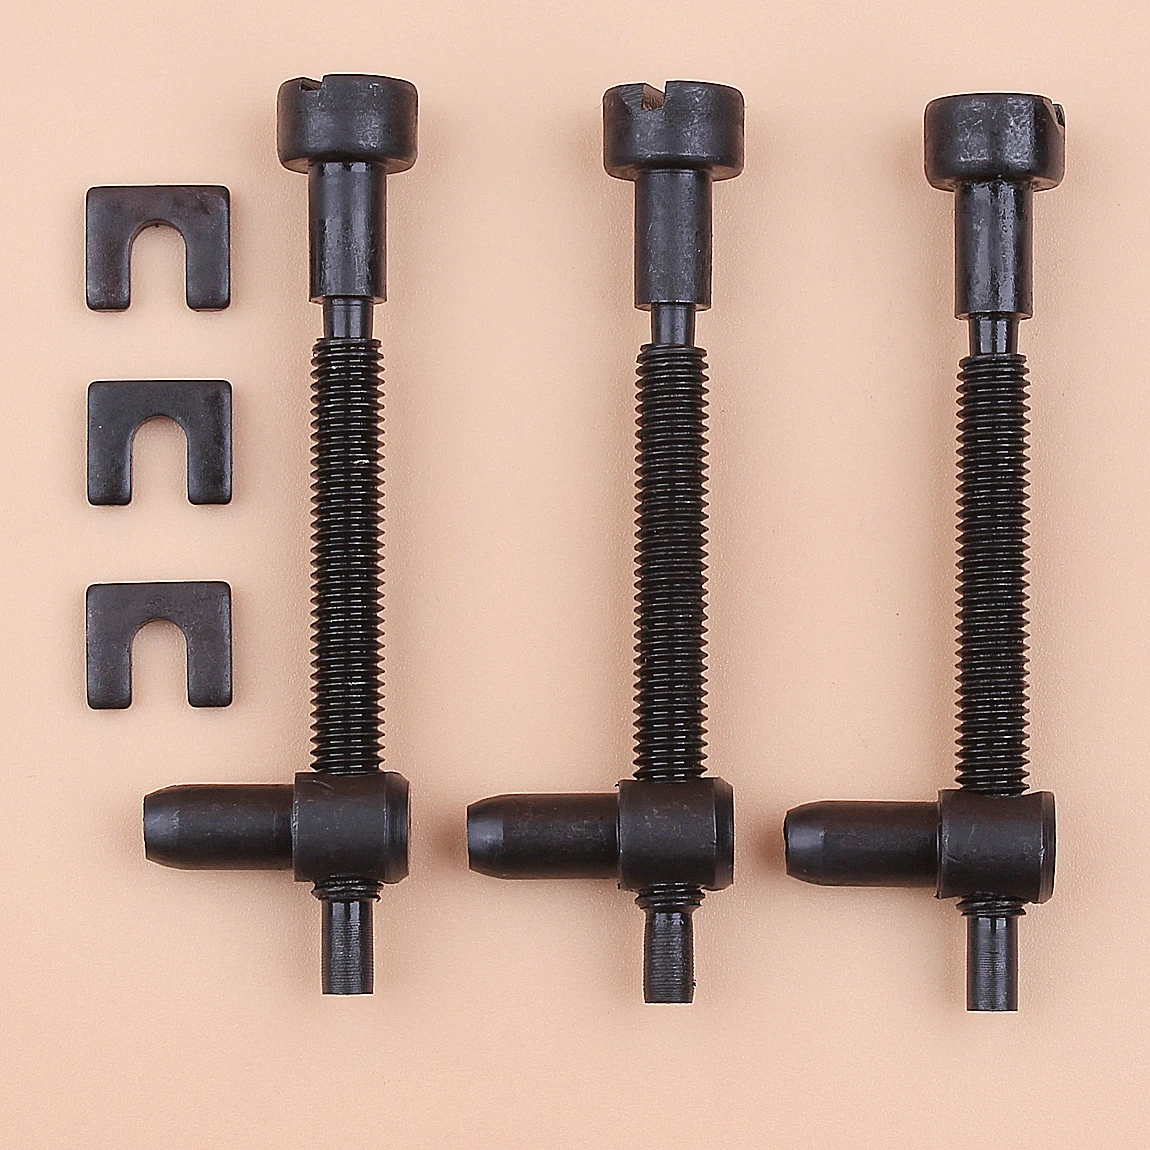 

3Pcs/lot Chain Adjuster Tensioner Screw For HUSQVARNA 61 66 266 268 272 281 288 162 181 281XP 501537101 Chainsaw Spare Parts